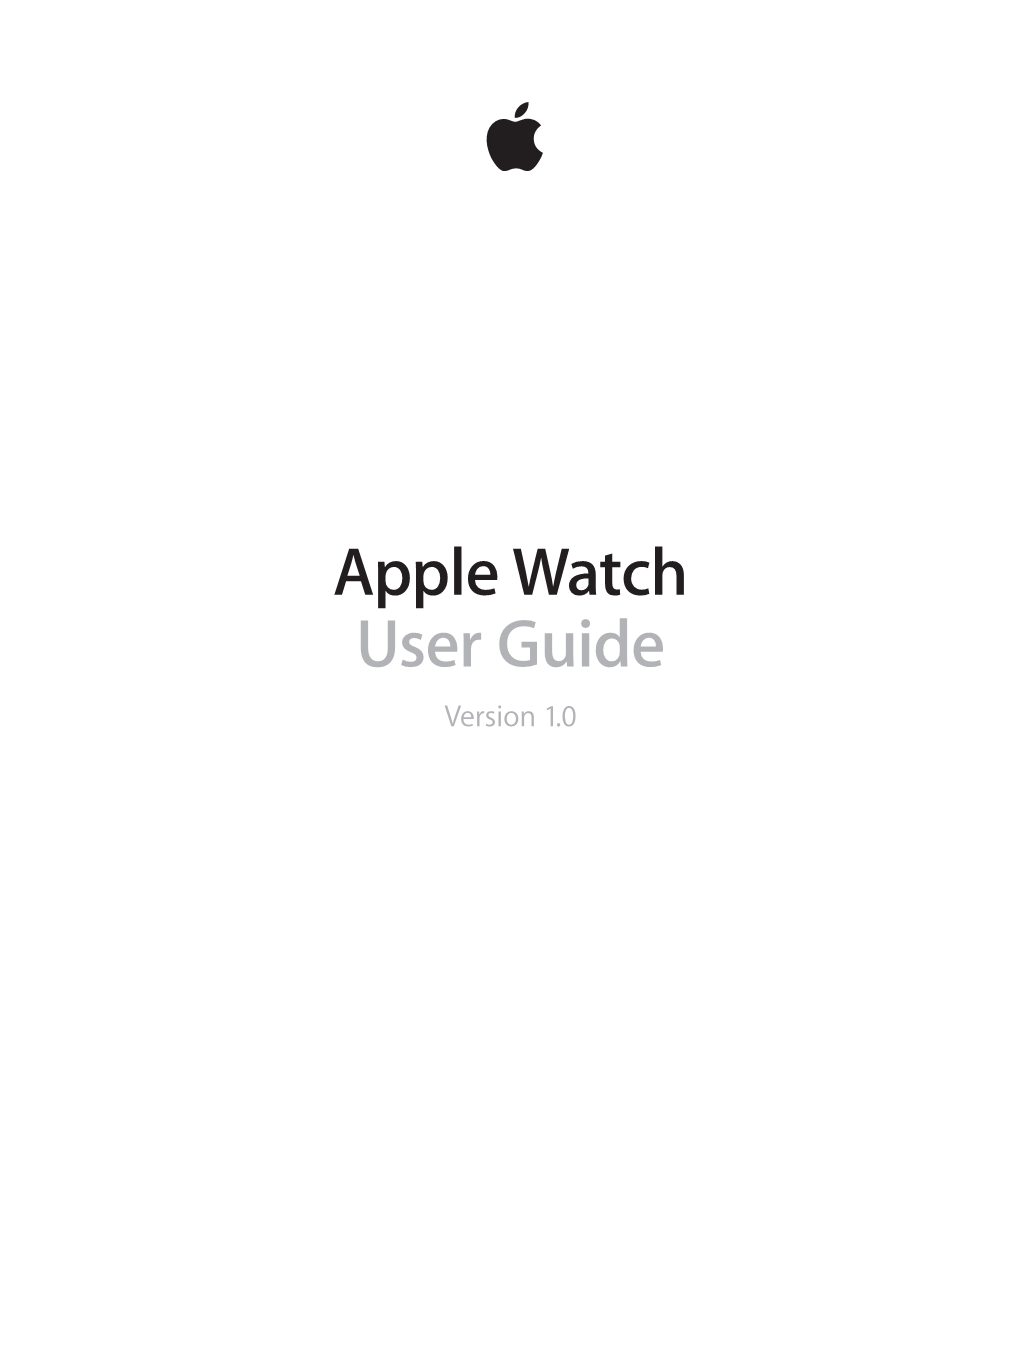 Apple Watch User Guide Version 1.0 Contents